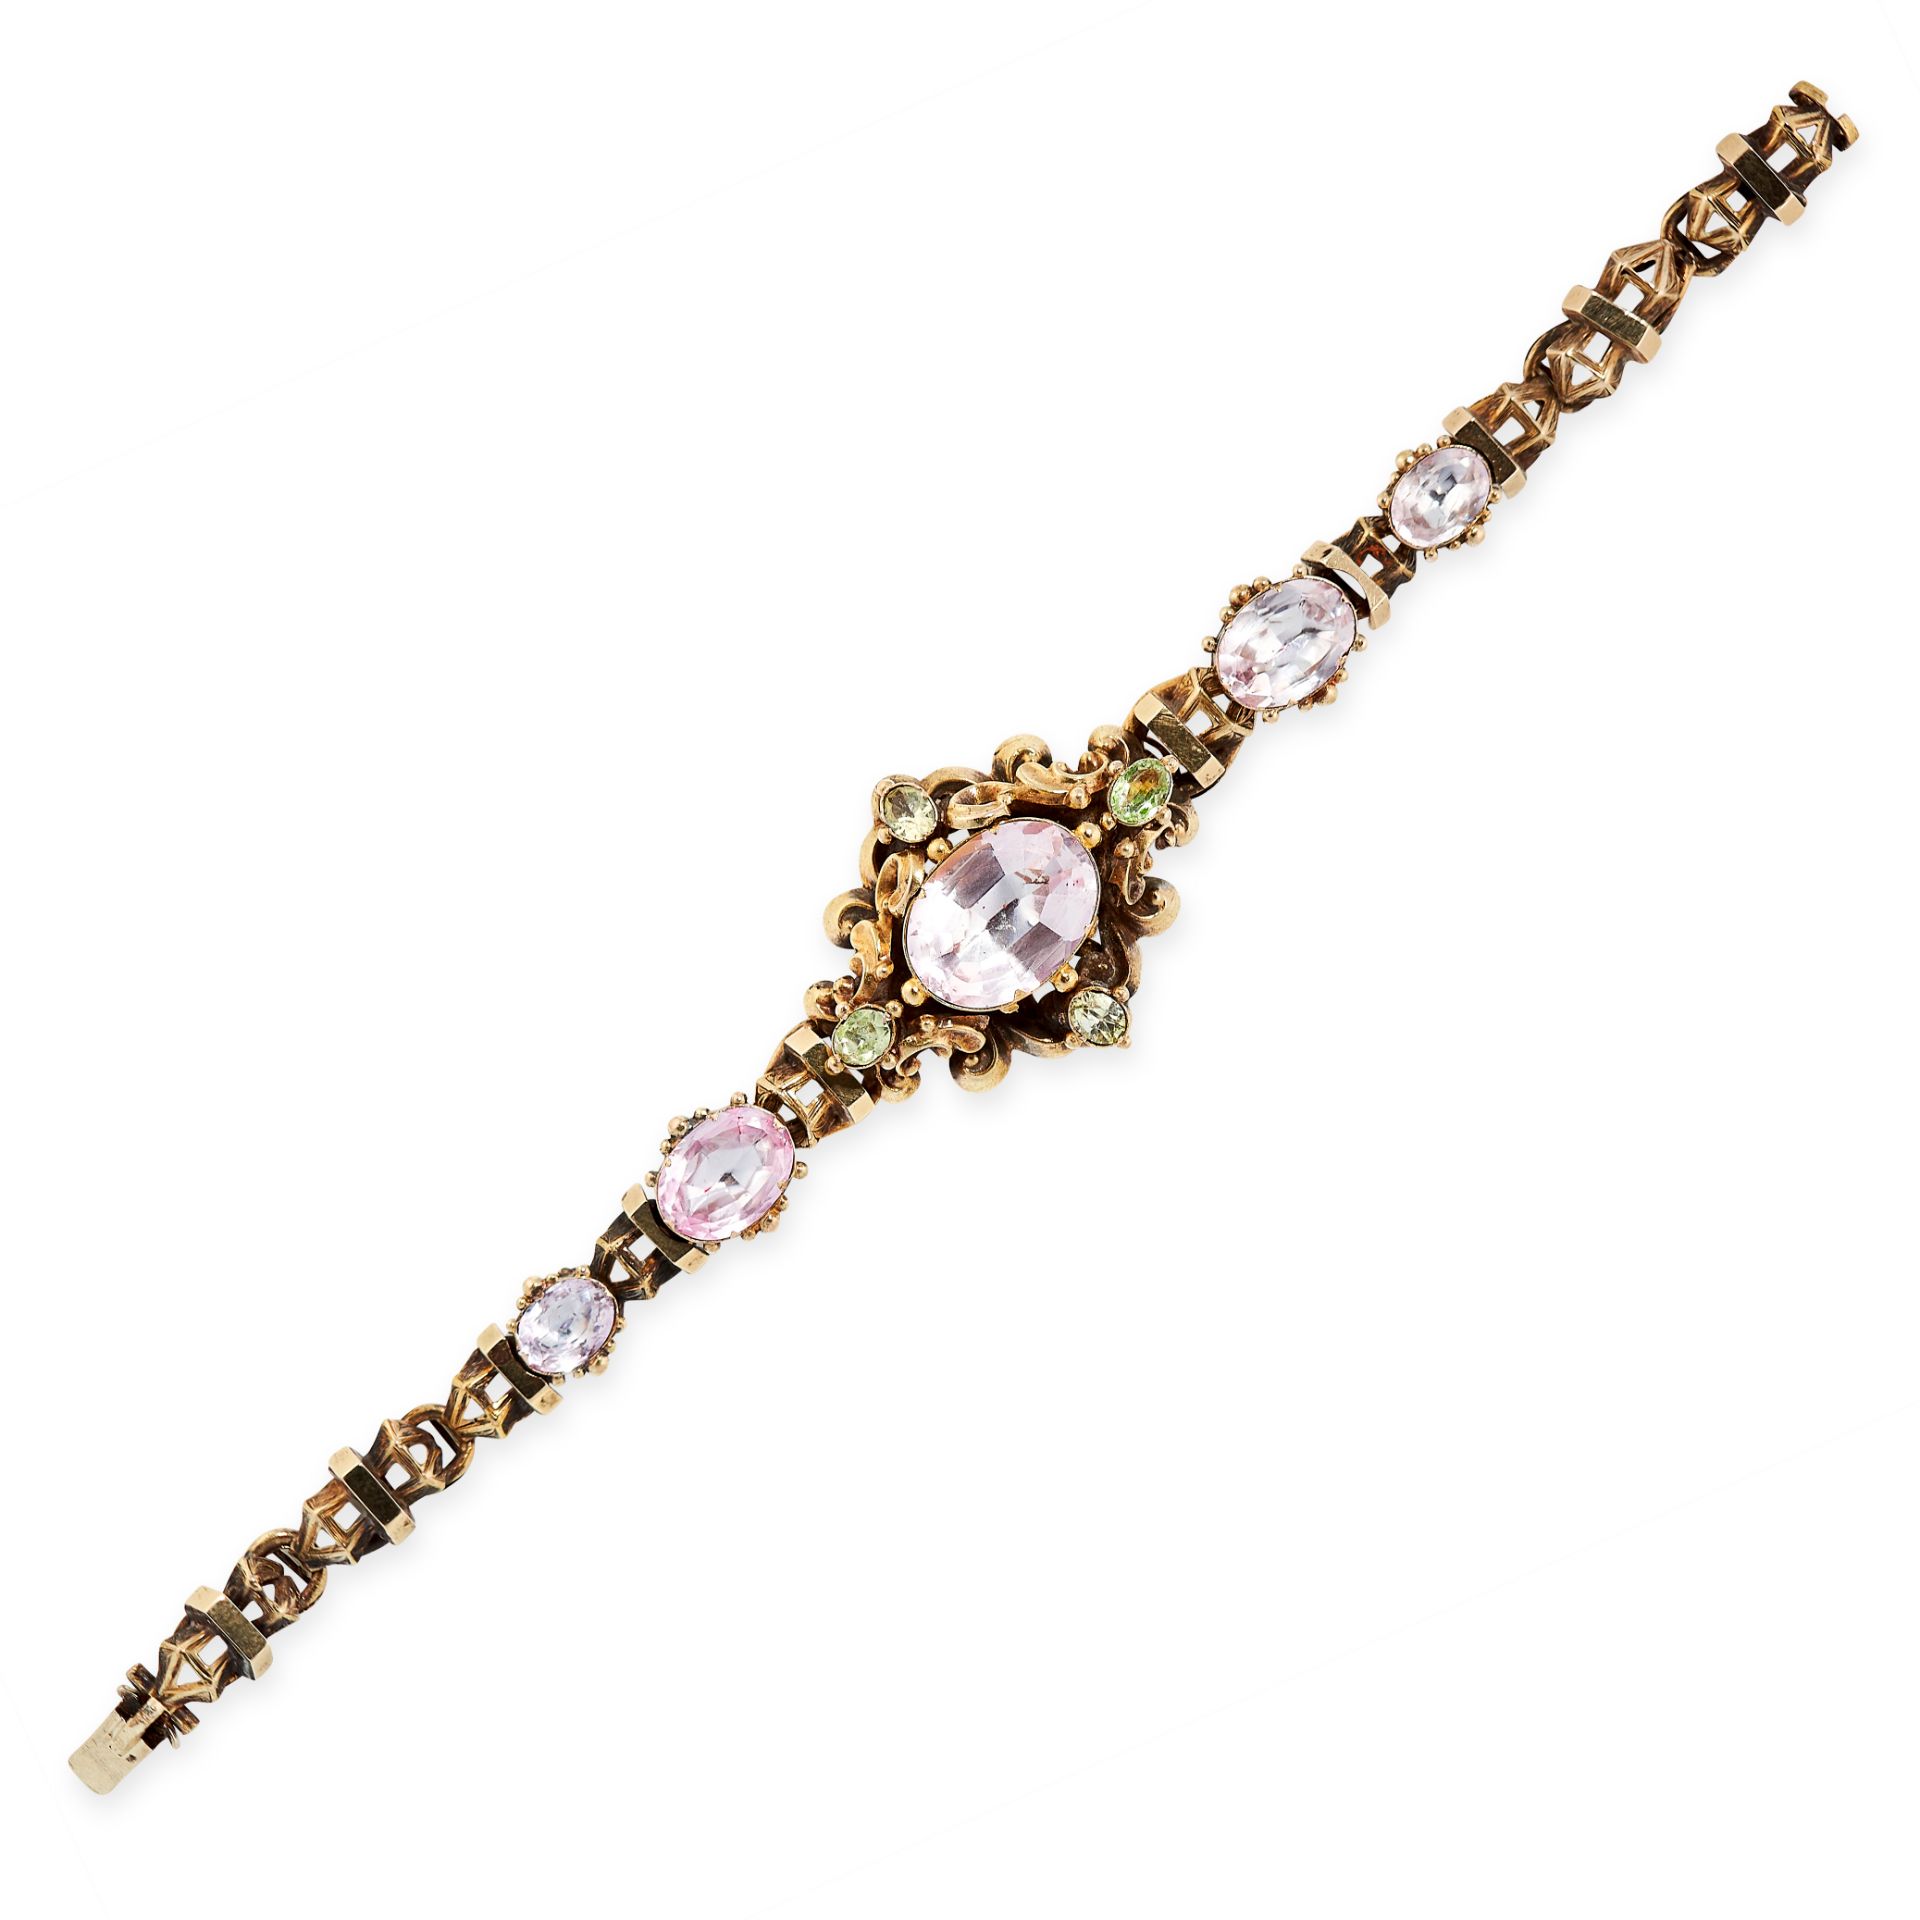 ANTIQUE PINK TOPAZ AND CHRYSOBERYL BRACELET in yellow gold, set with oval cut pink topaz and